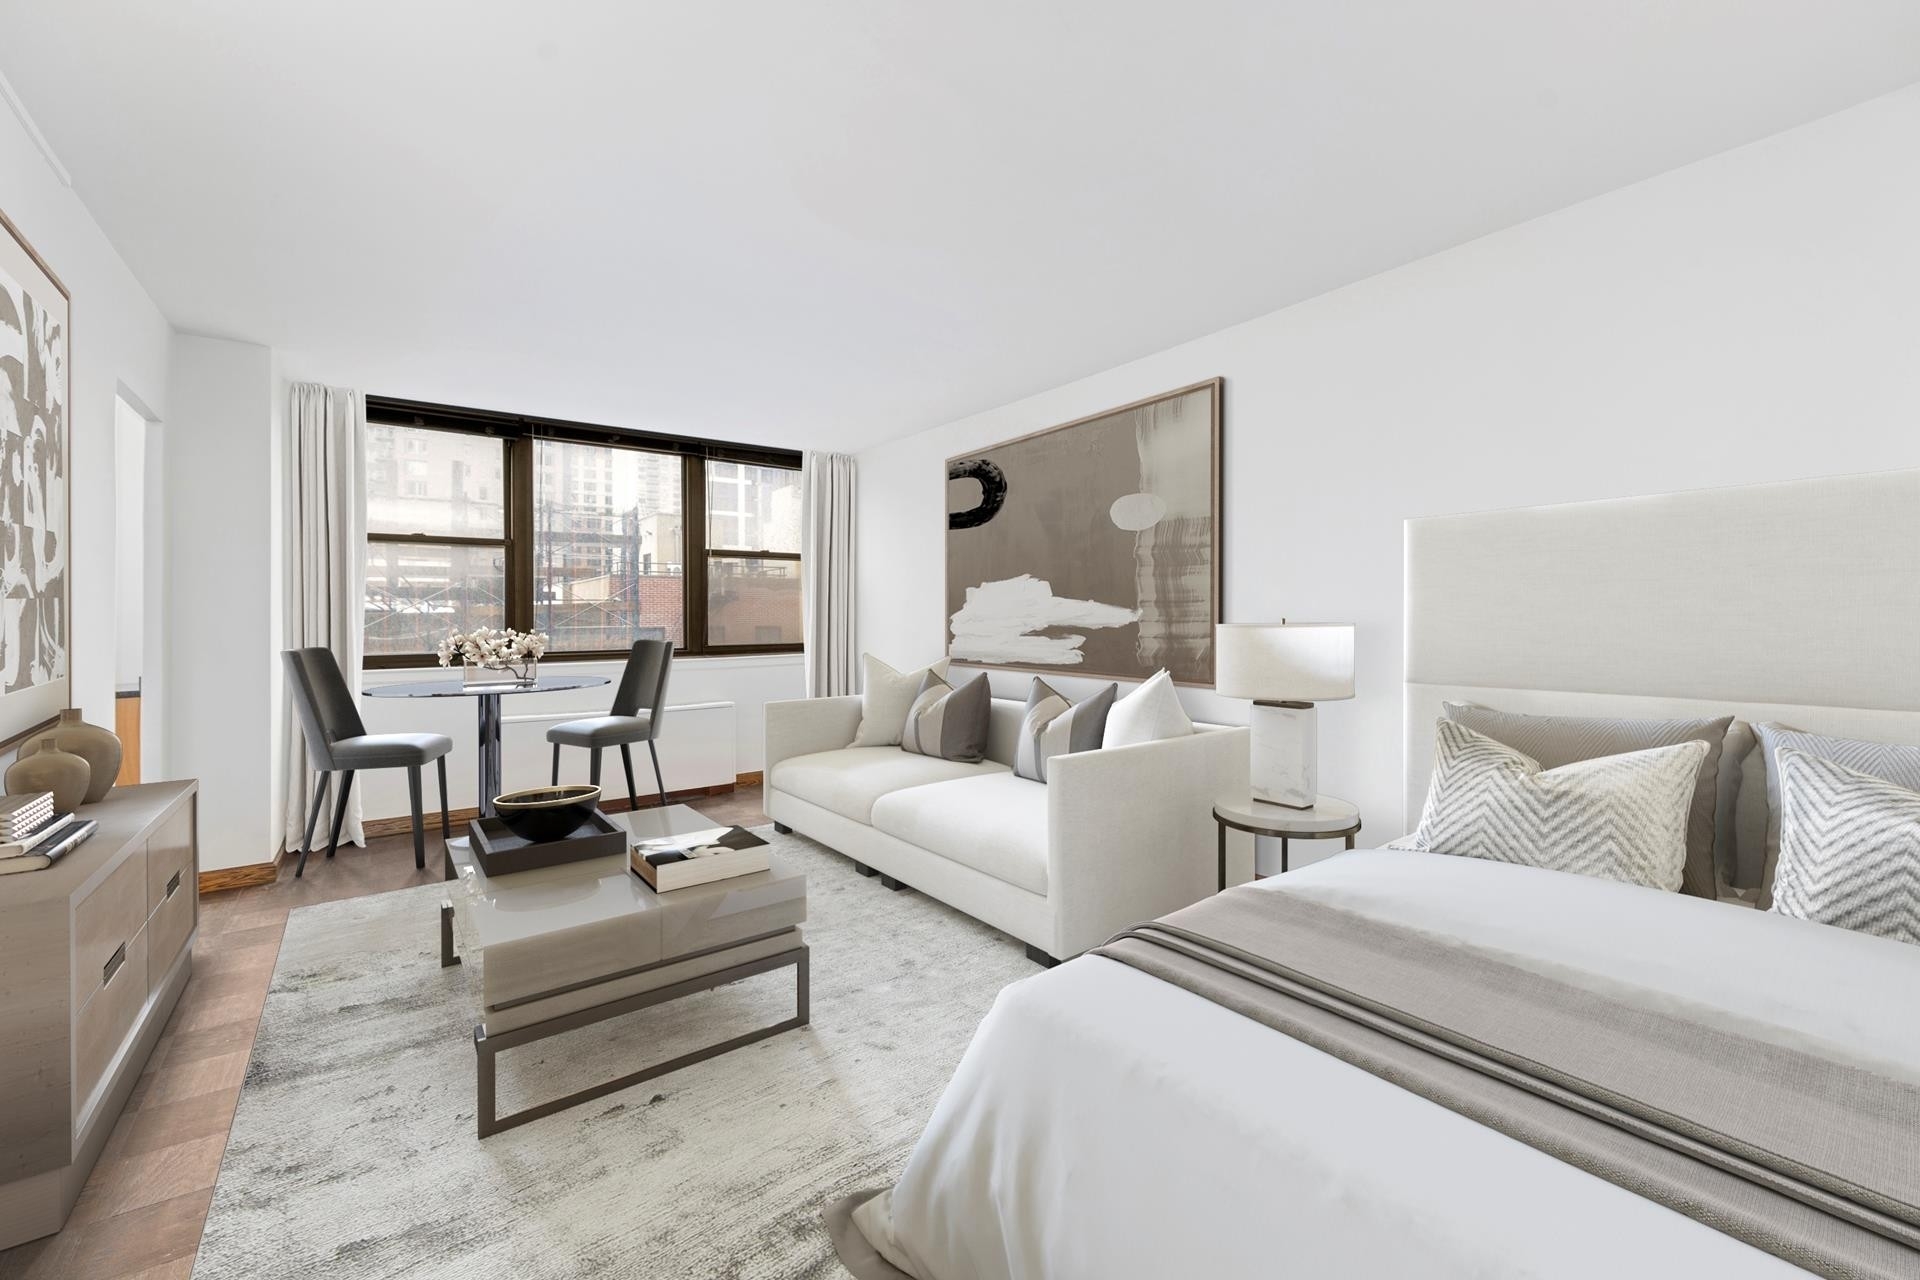 Co-op Properties for Sale at Murray Hill Crescent, 225 E 36TH ST, 7M Murray Hill, New York, New York 10016